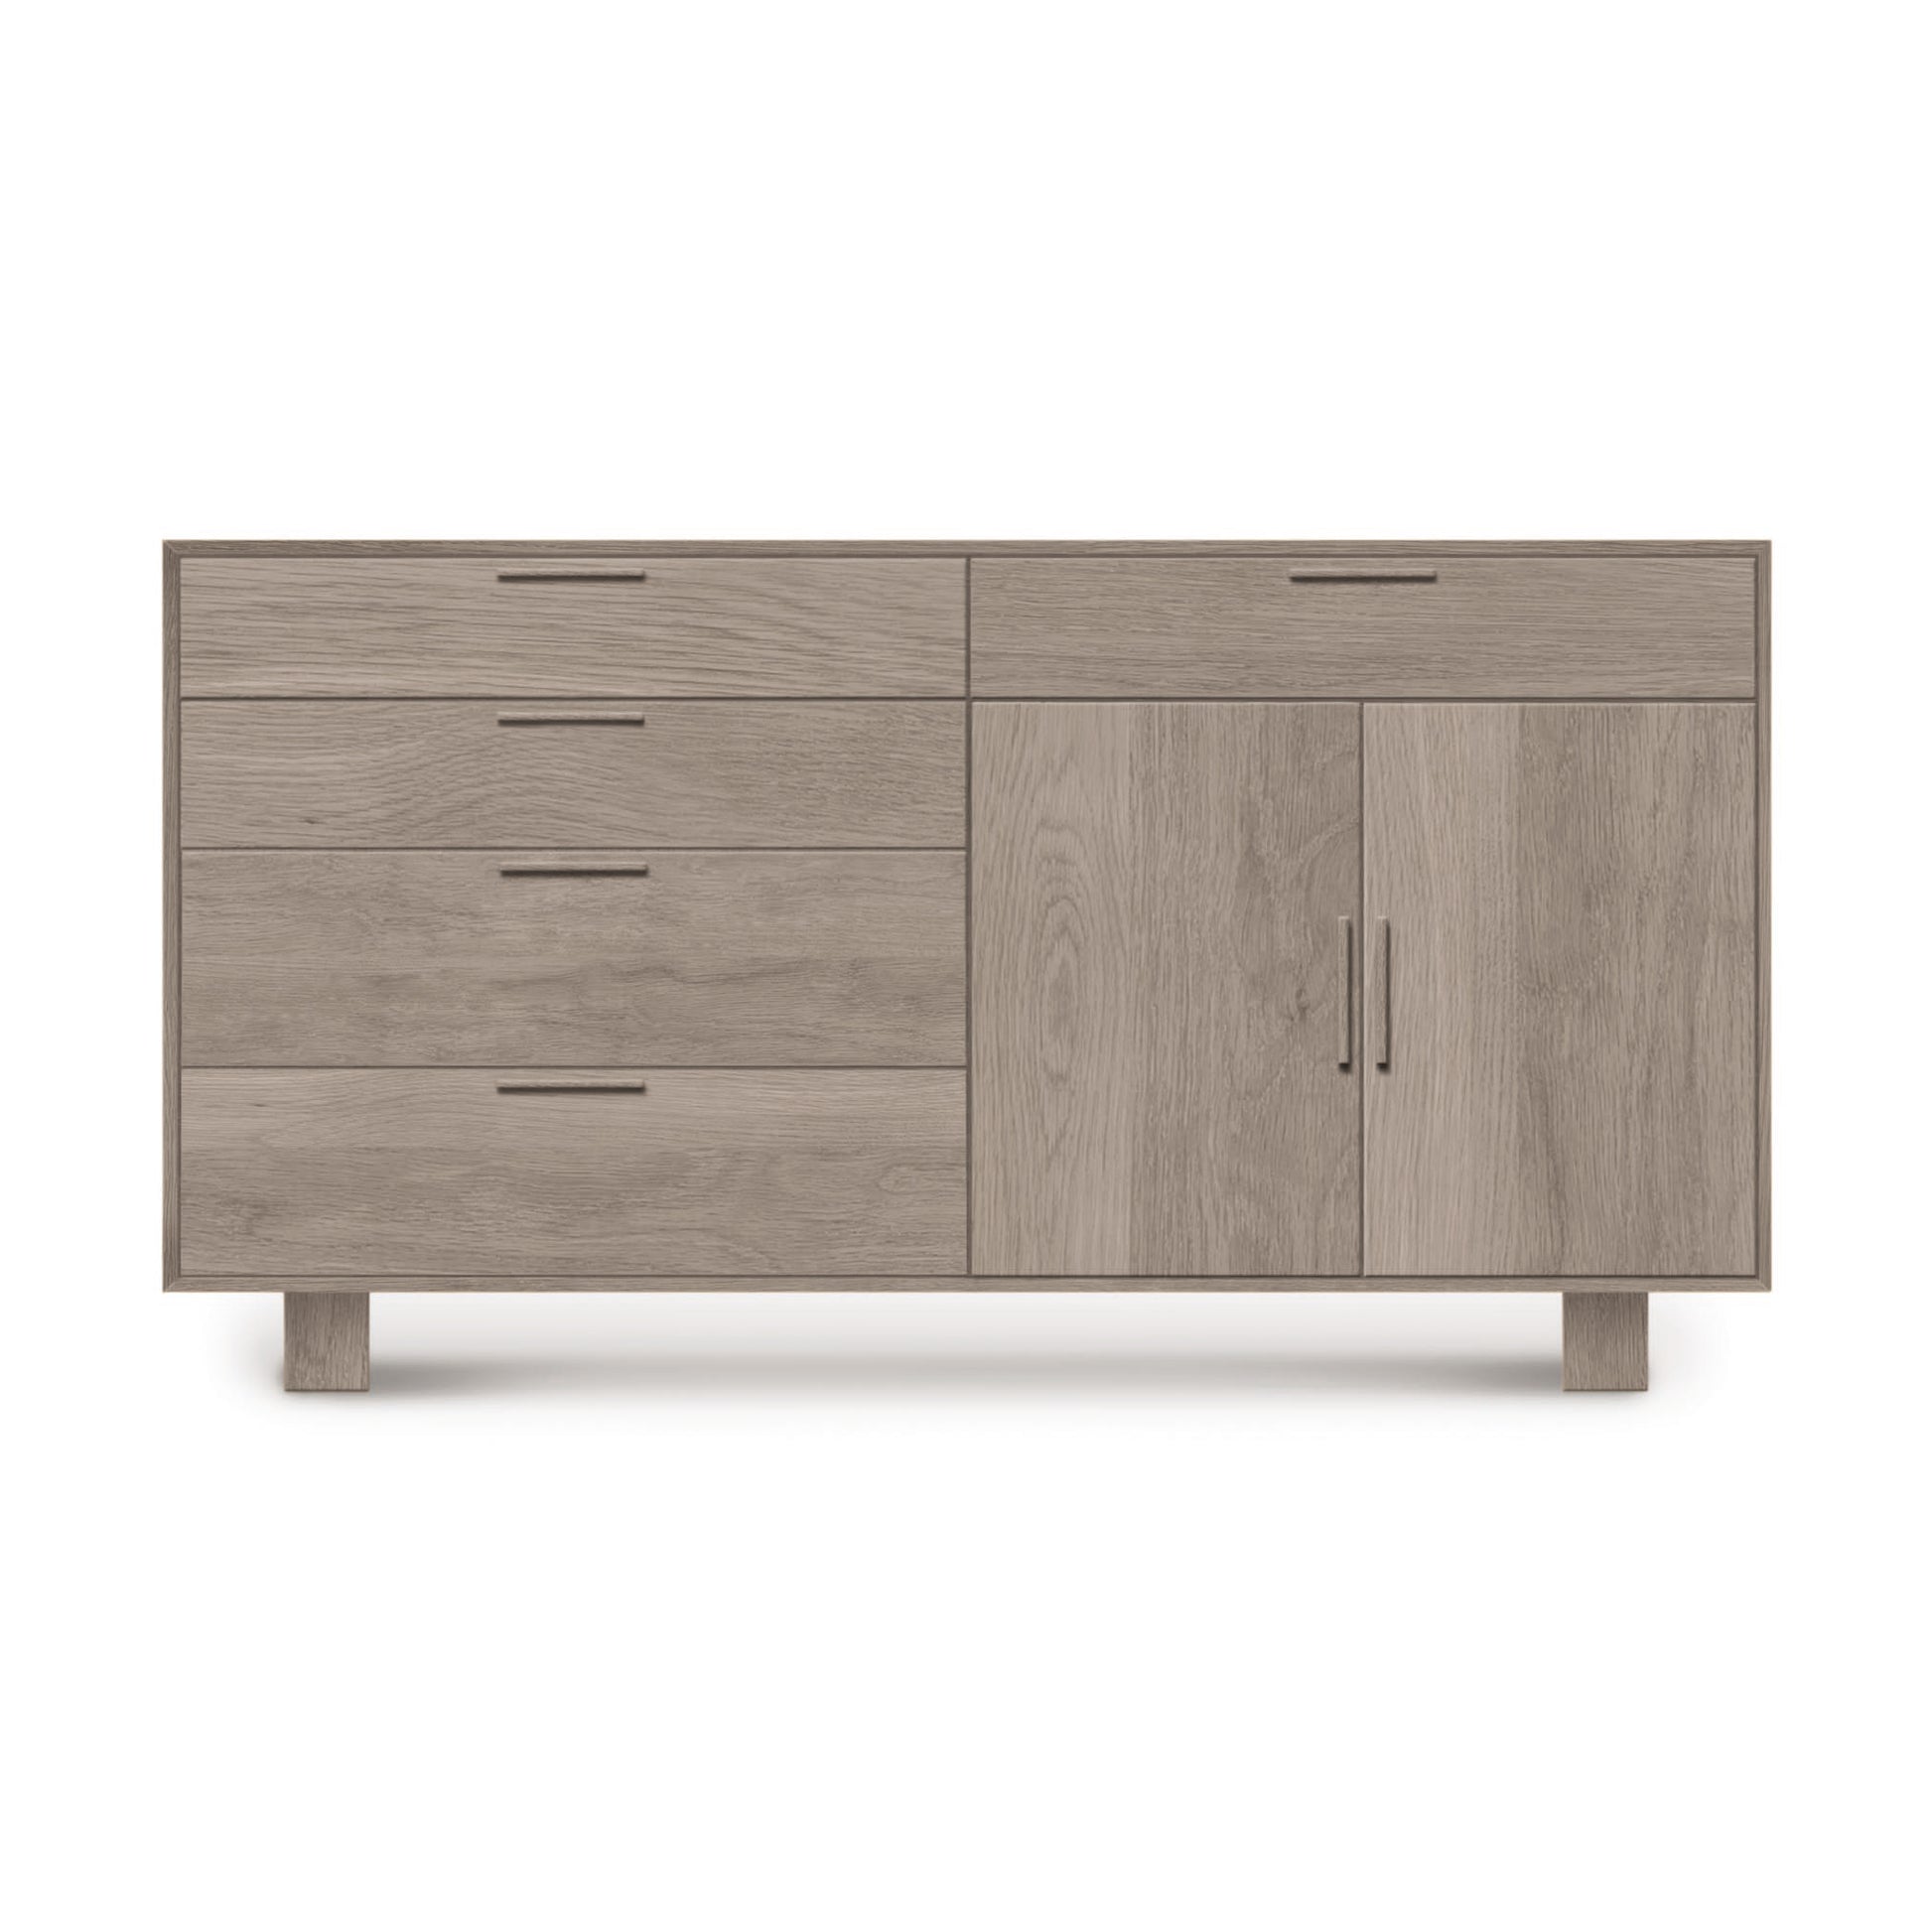 A modern Copeland Furniture Iso Oak 2 Door, 5 Drawer Buffet with drawers on the left and a cabinet section on the right against a white background, showcasing solid hardwood oak.